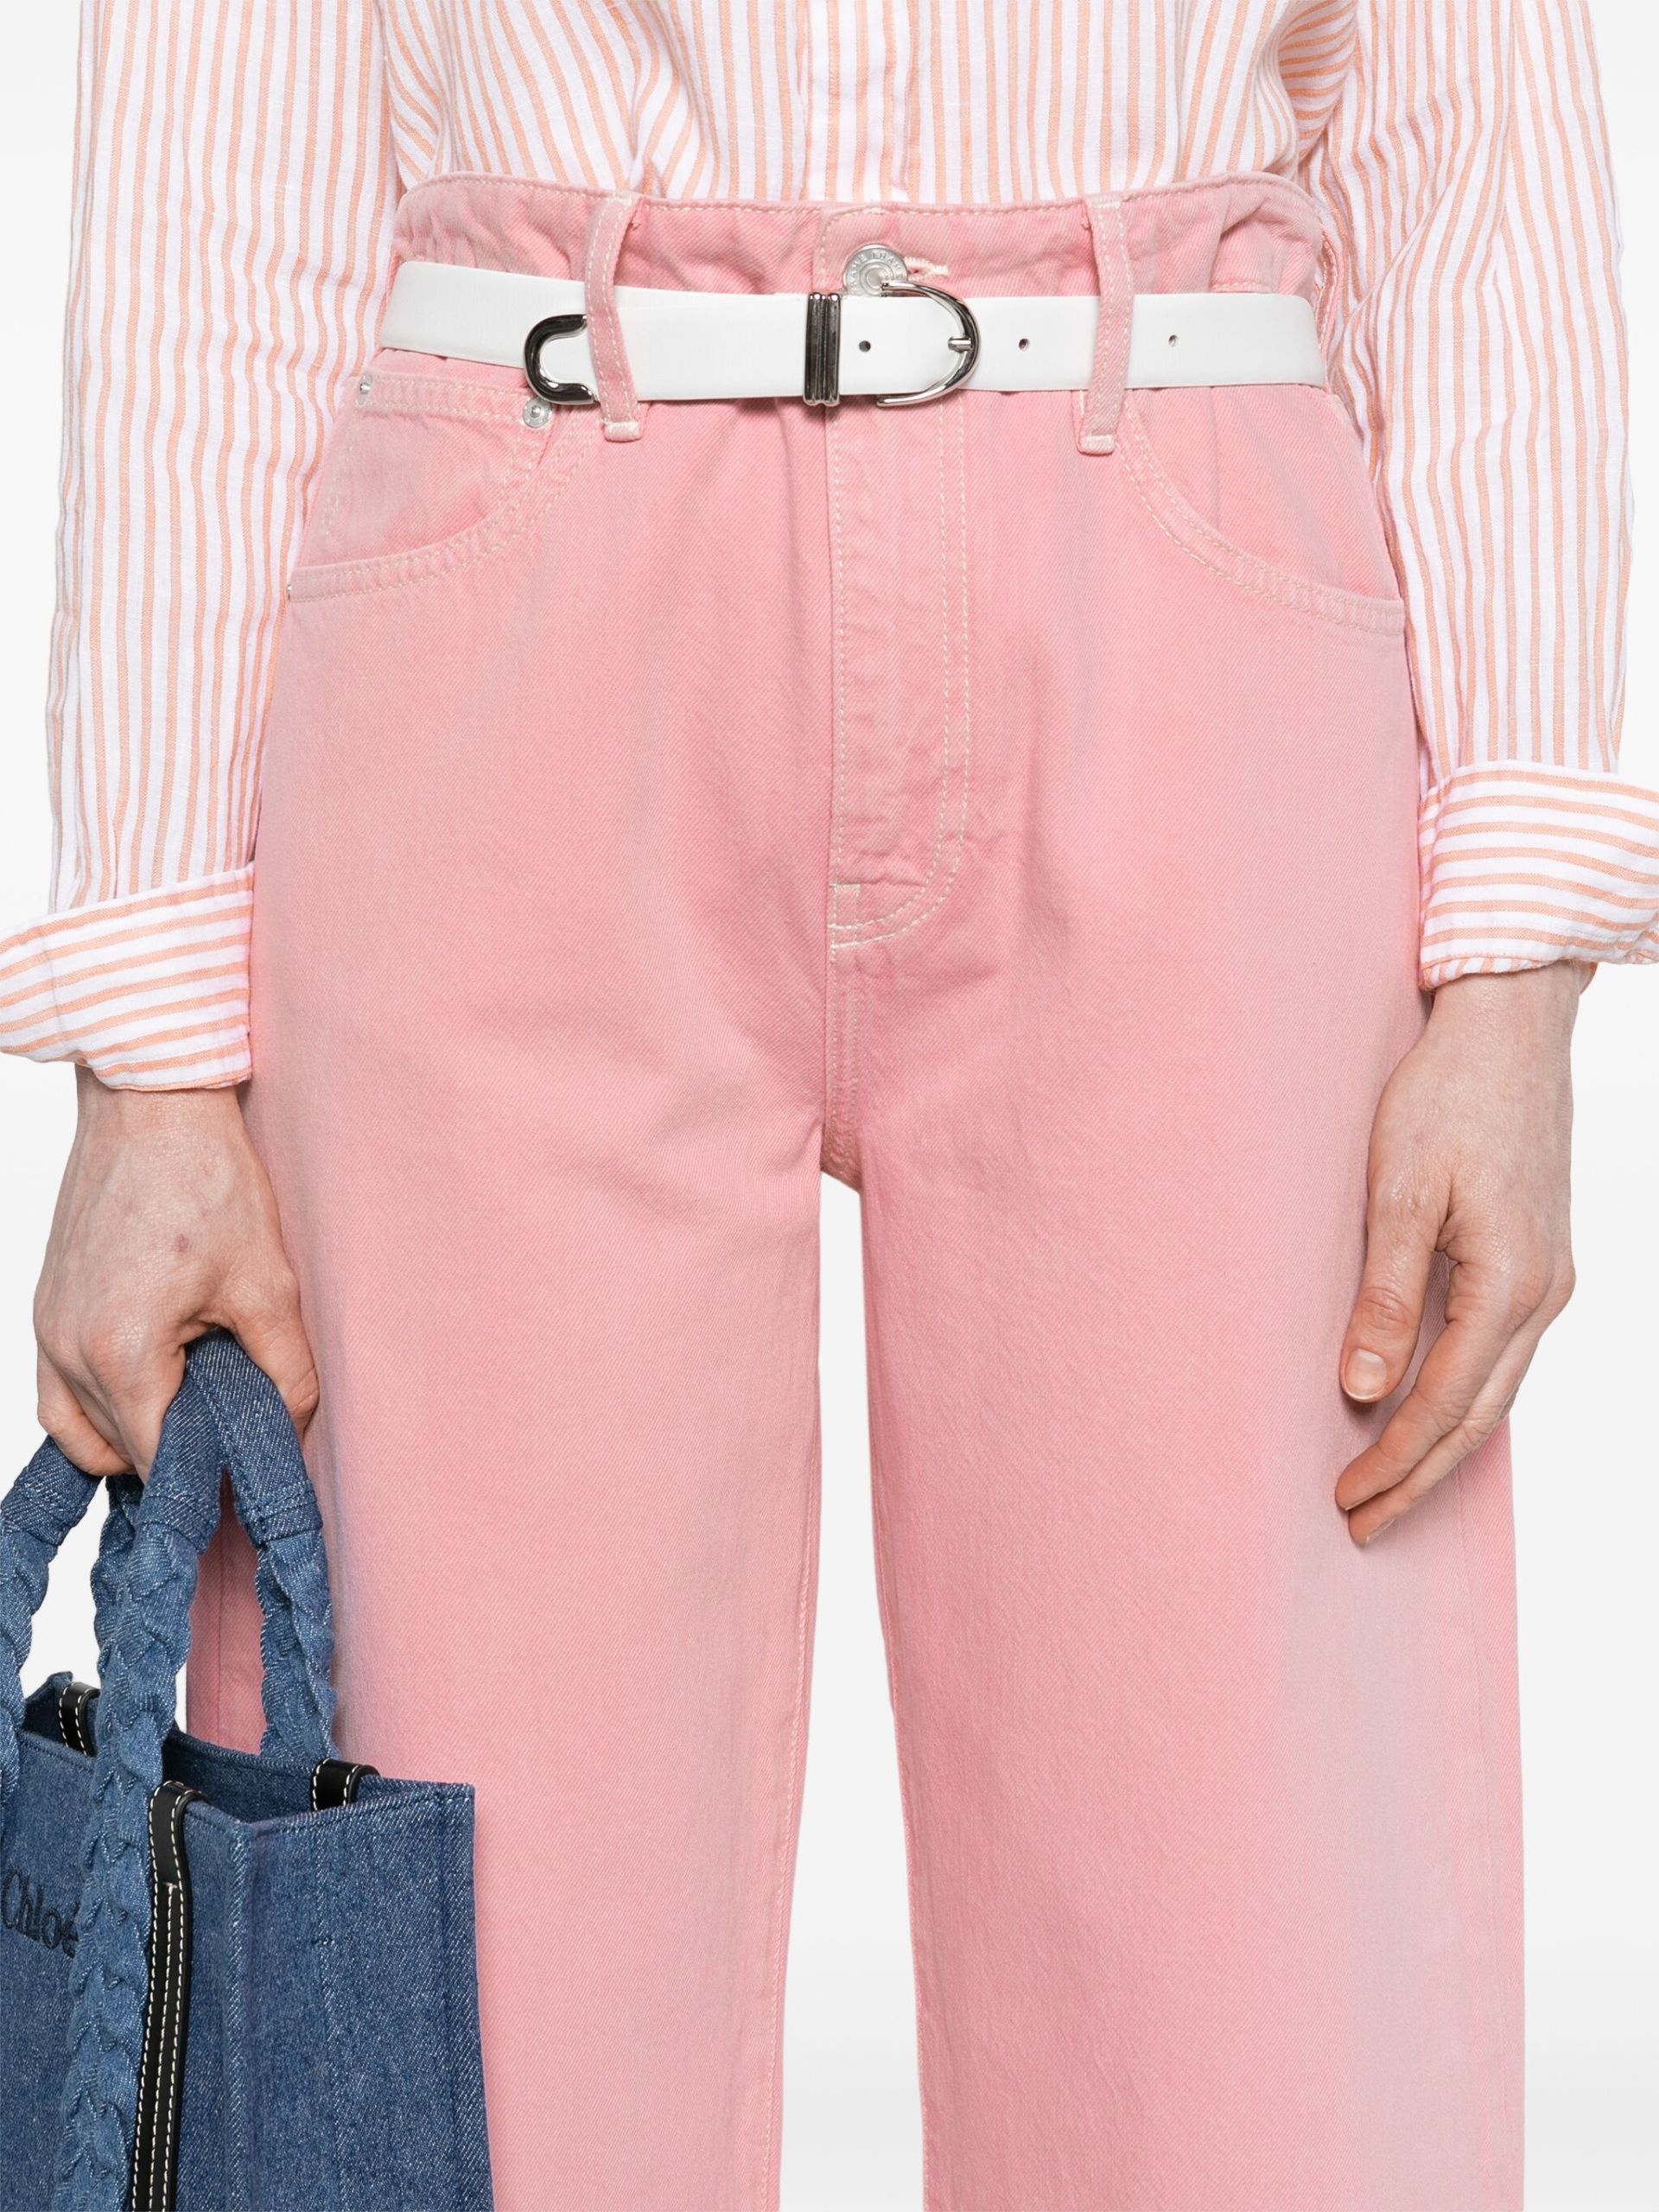 Pink Long Barrel Tapered Jeans - 5